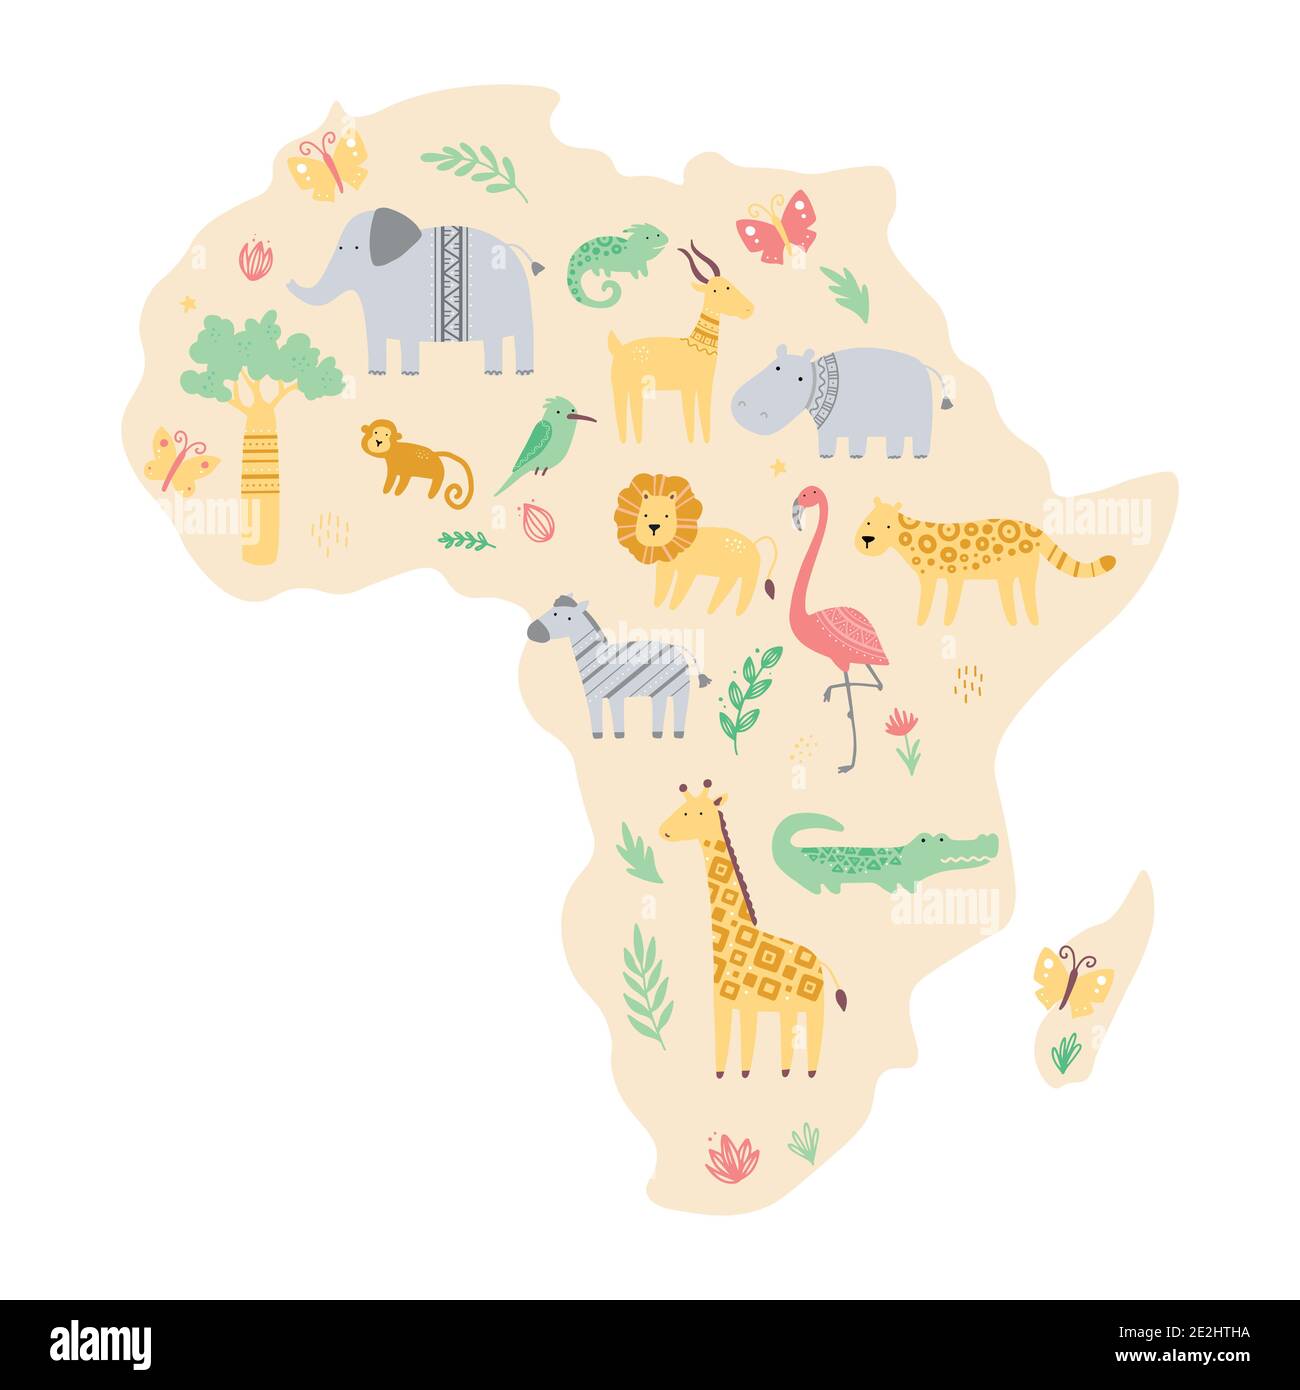 Africa map with cute african zoo animals giraffe, zebra, lion, bird, elephant, snake, lizard, cheetah, crocodile. Flat and simple design style for baby, children illustration. Stock Vector